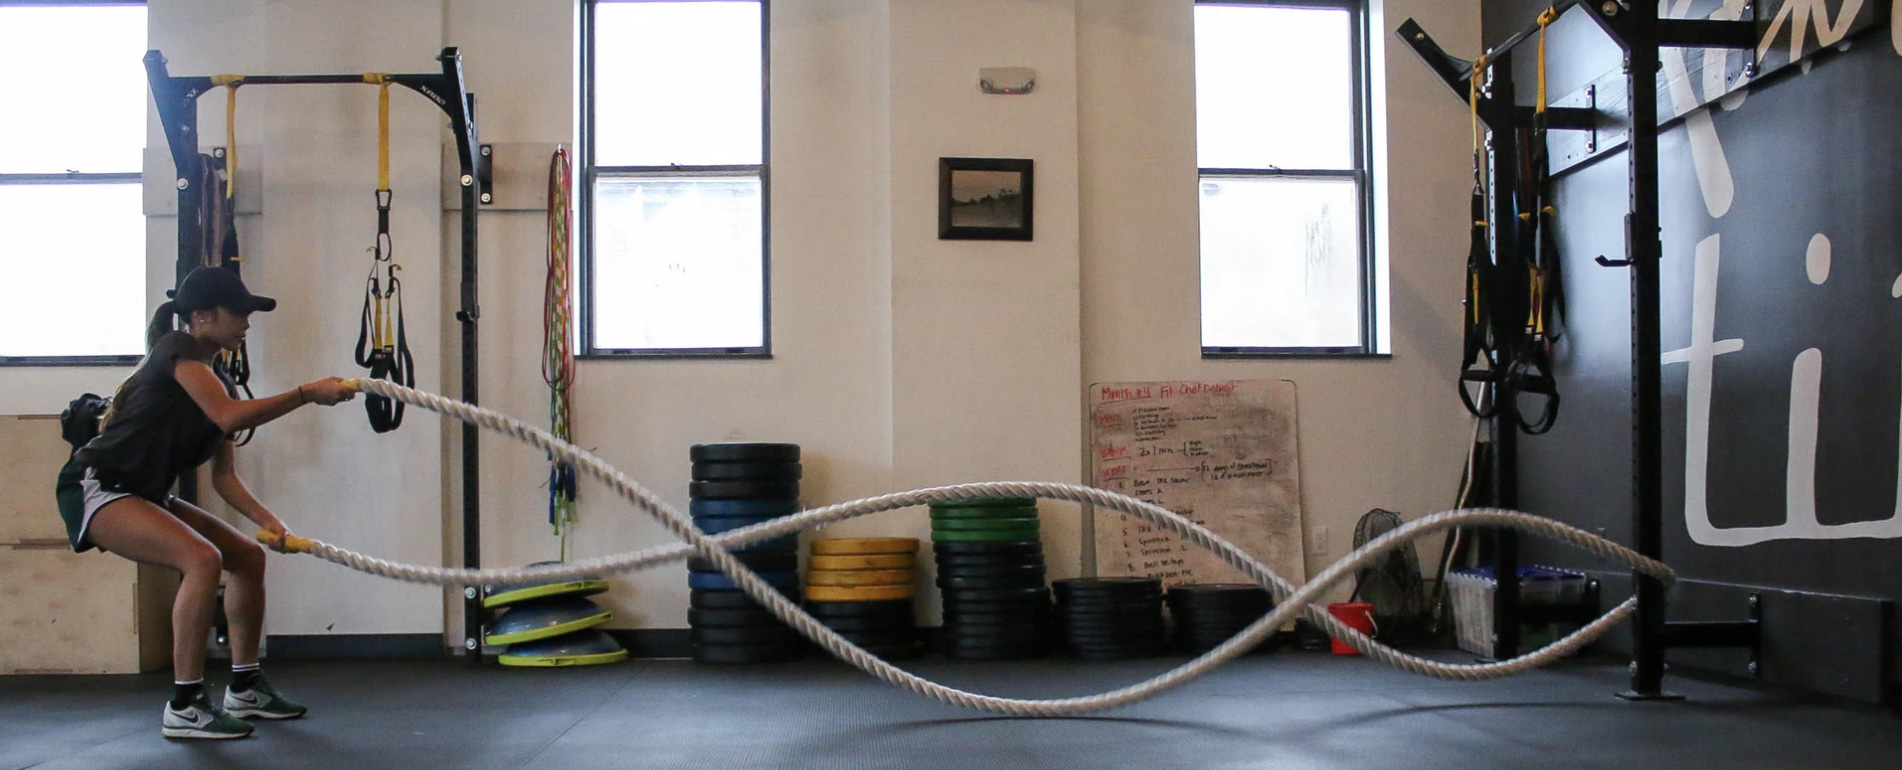 Woman is doing workout in a fitness room with rope